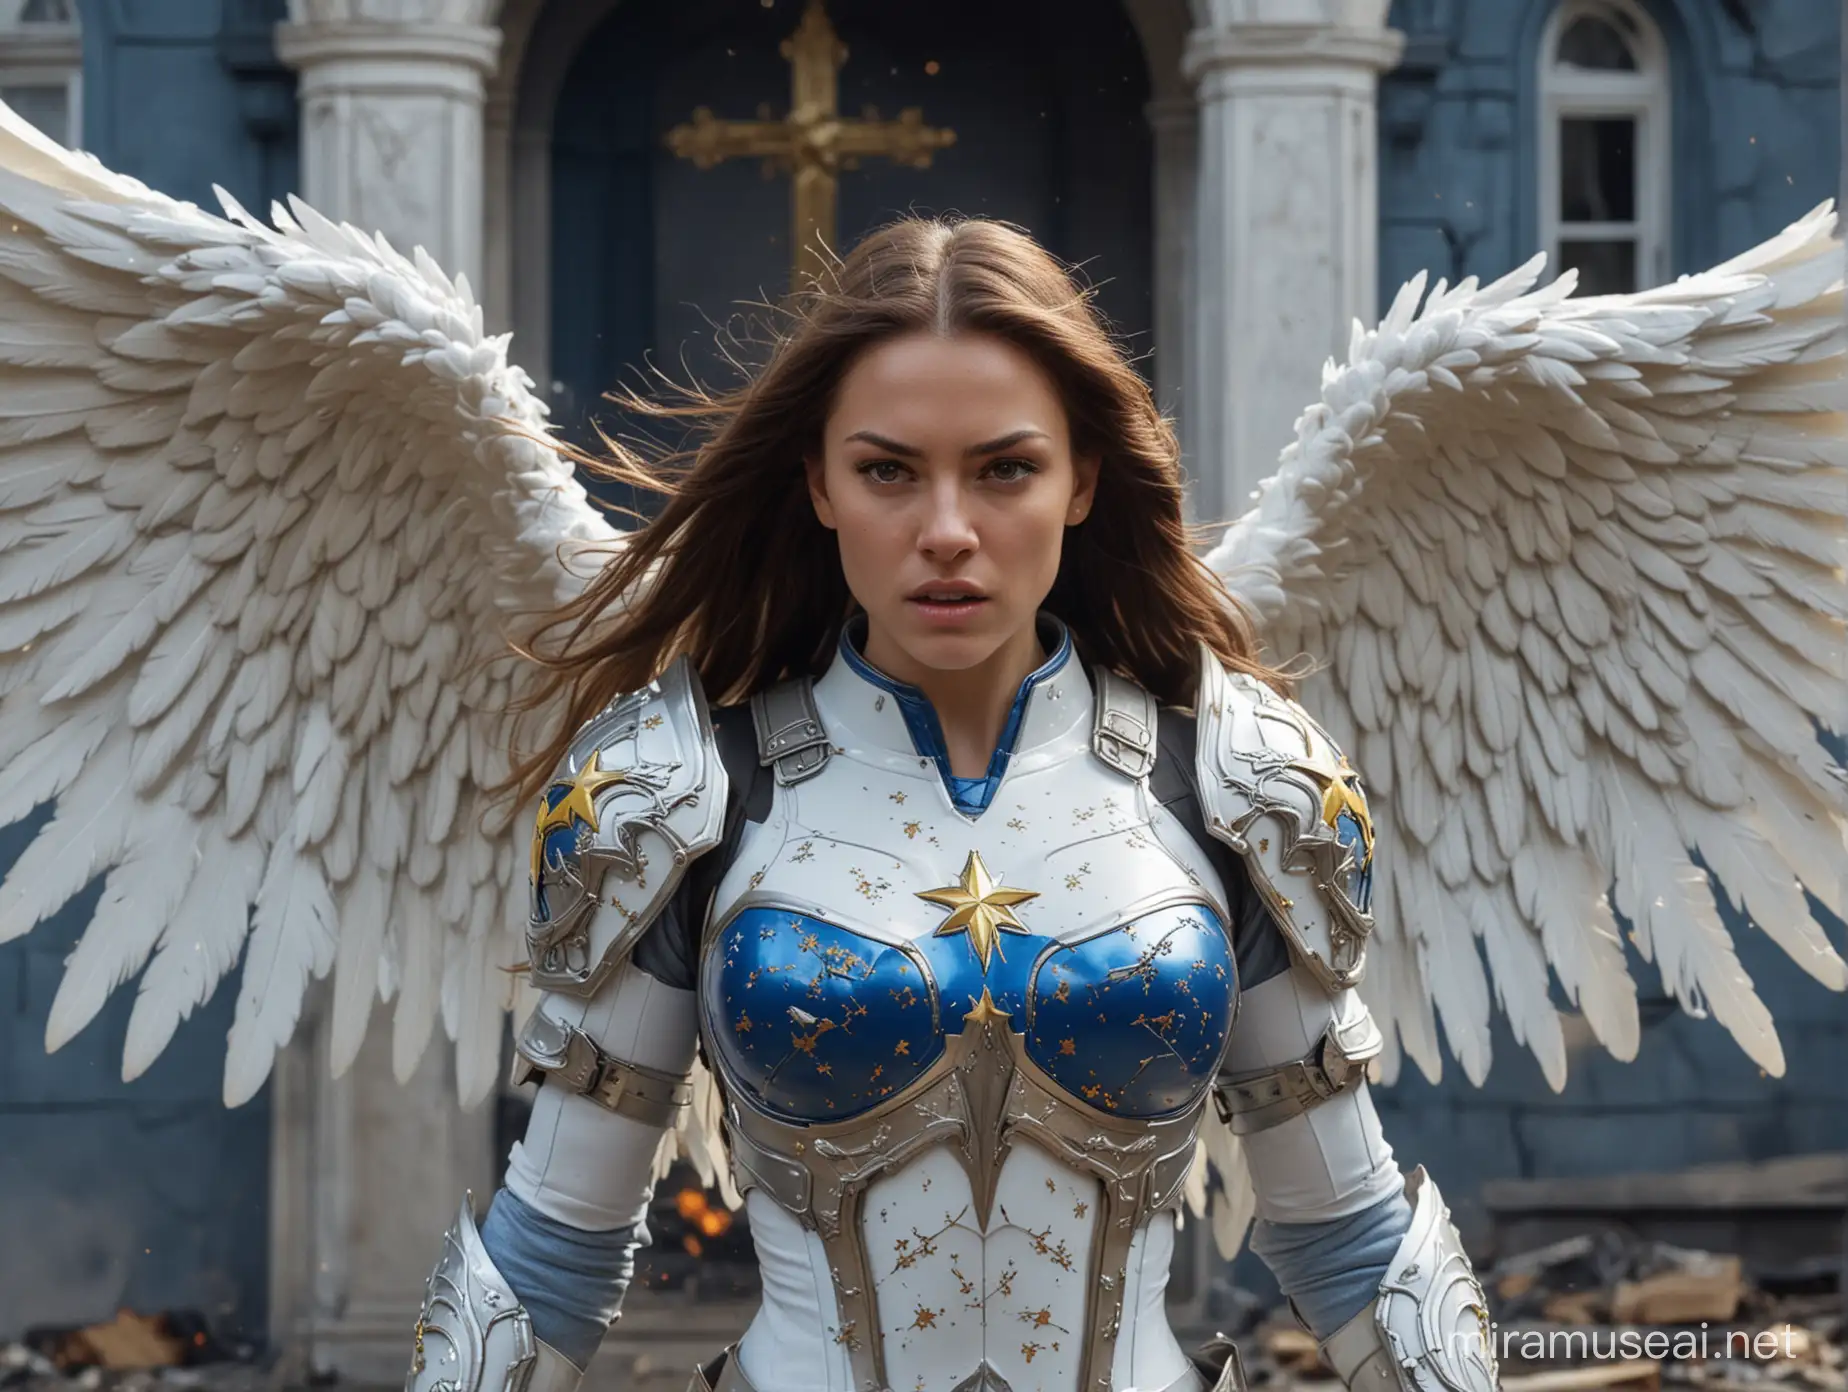 Angry Muscular Female Angel in Platinum Armor Points at Burning House